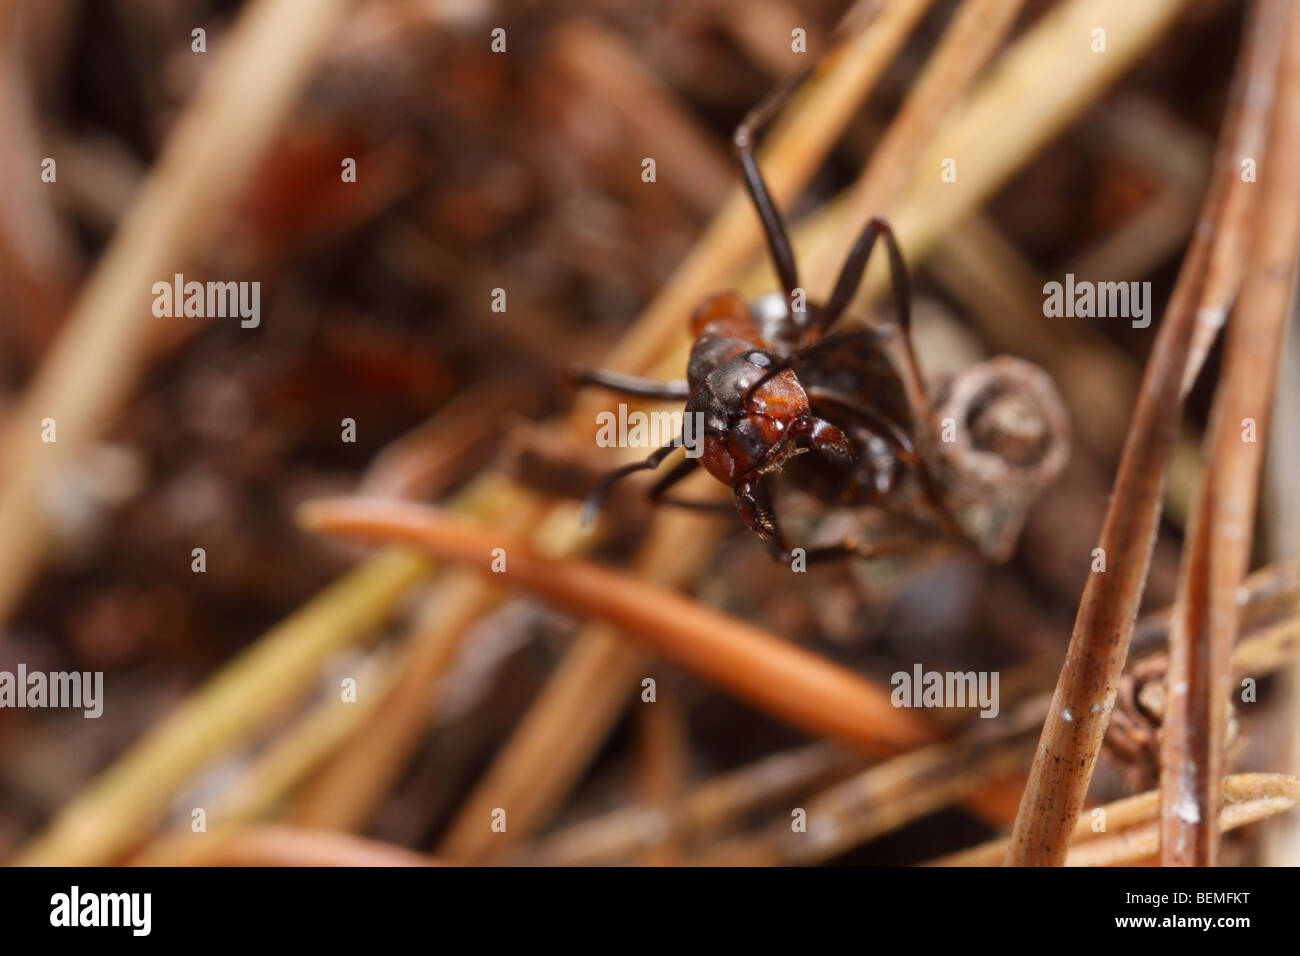 An ant of the Formica rufa-Formica polyctena group on pine needles, threatening the onlooker. Stock Photo